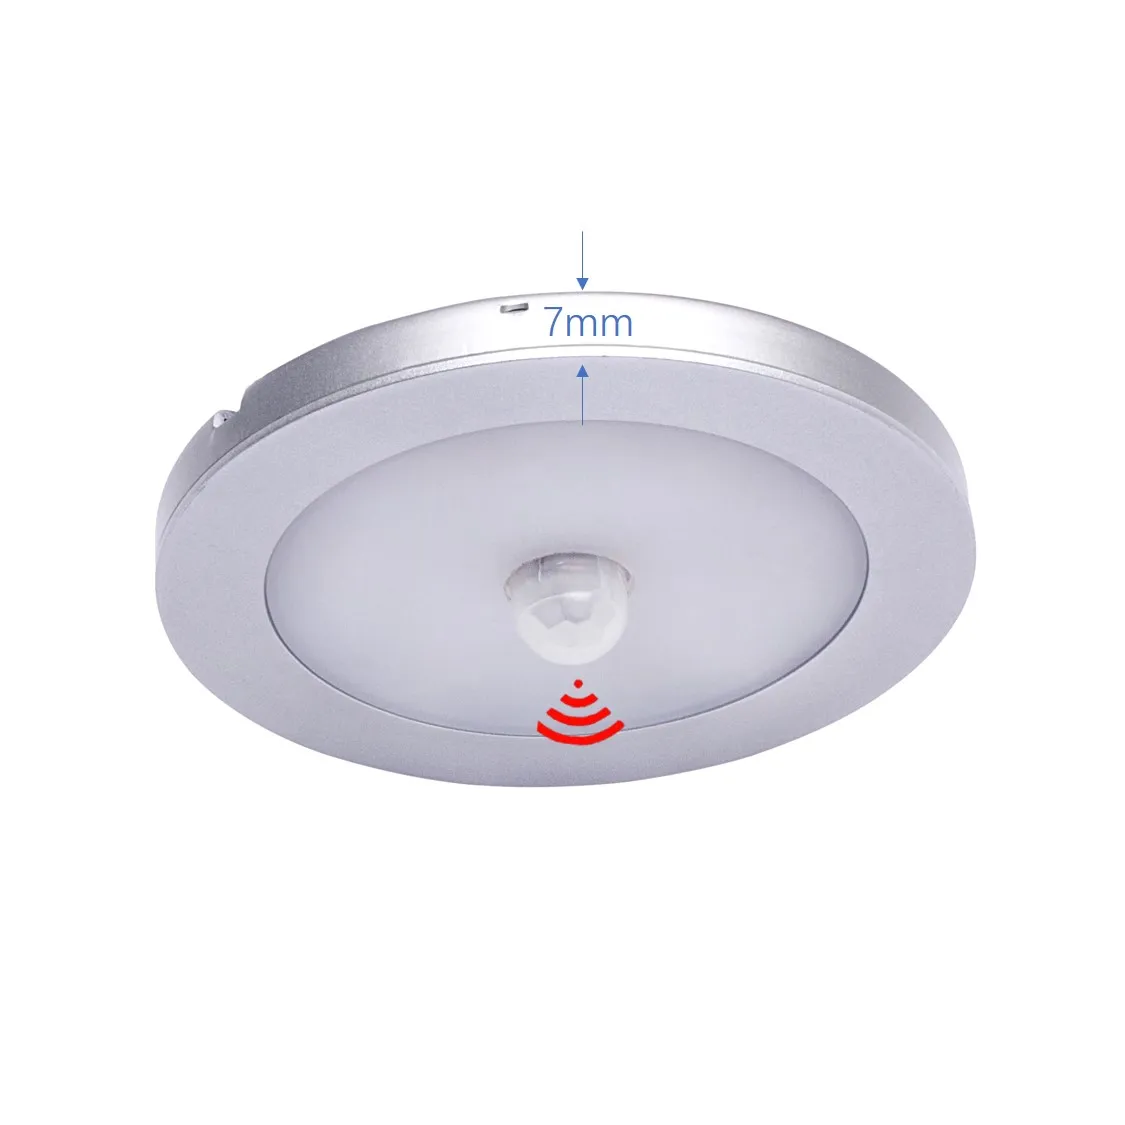 2020 Aluminium body ultrathin 7mm 3W Dimmable surface mounted led puck Light sensor round downlight